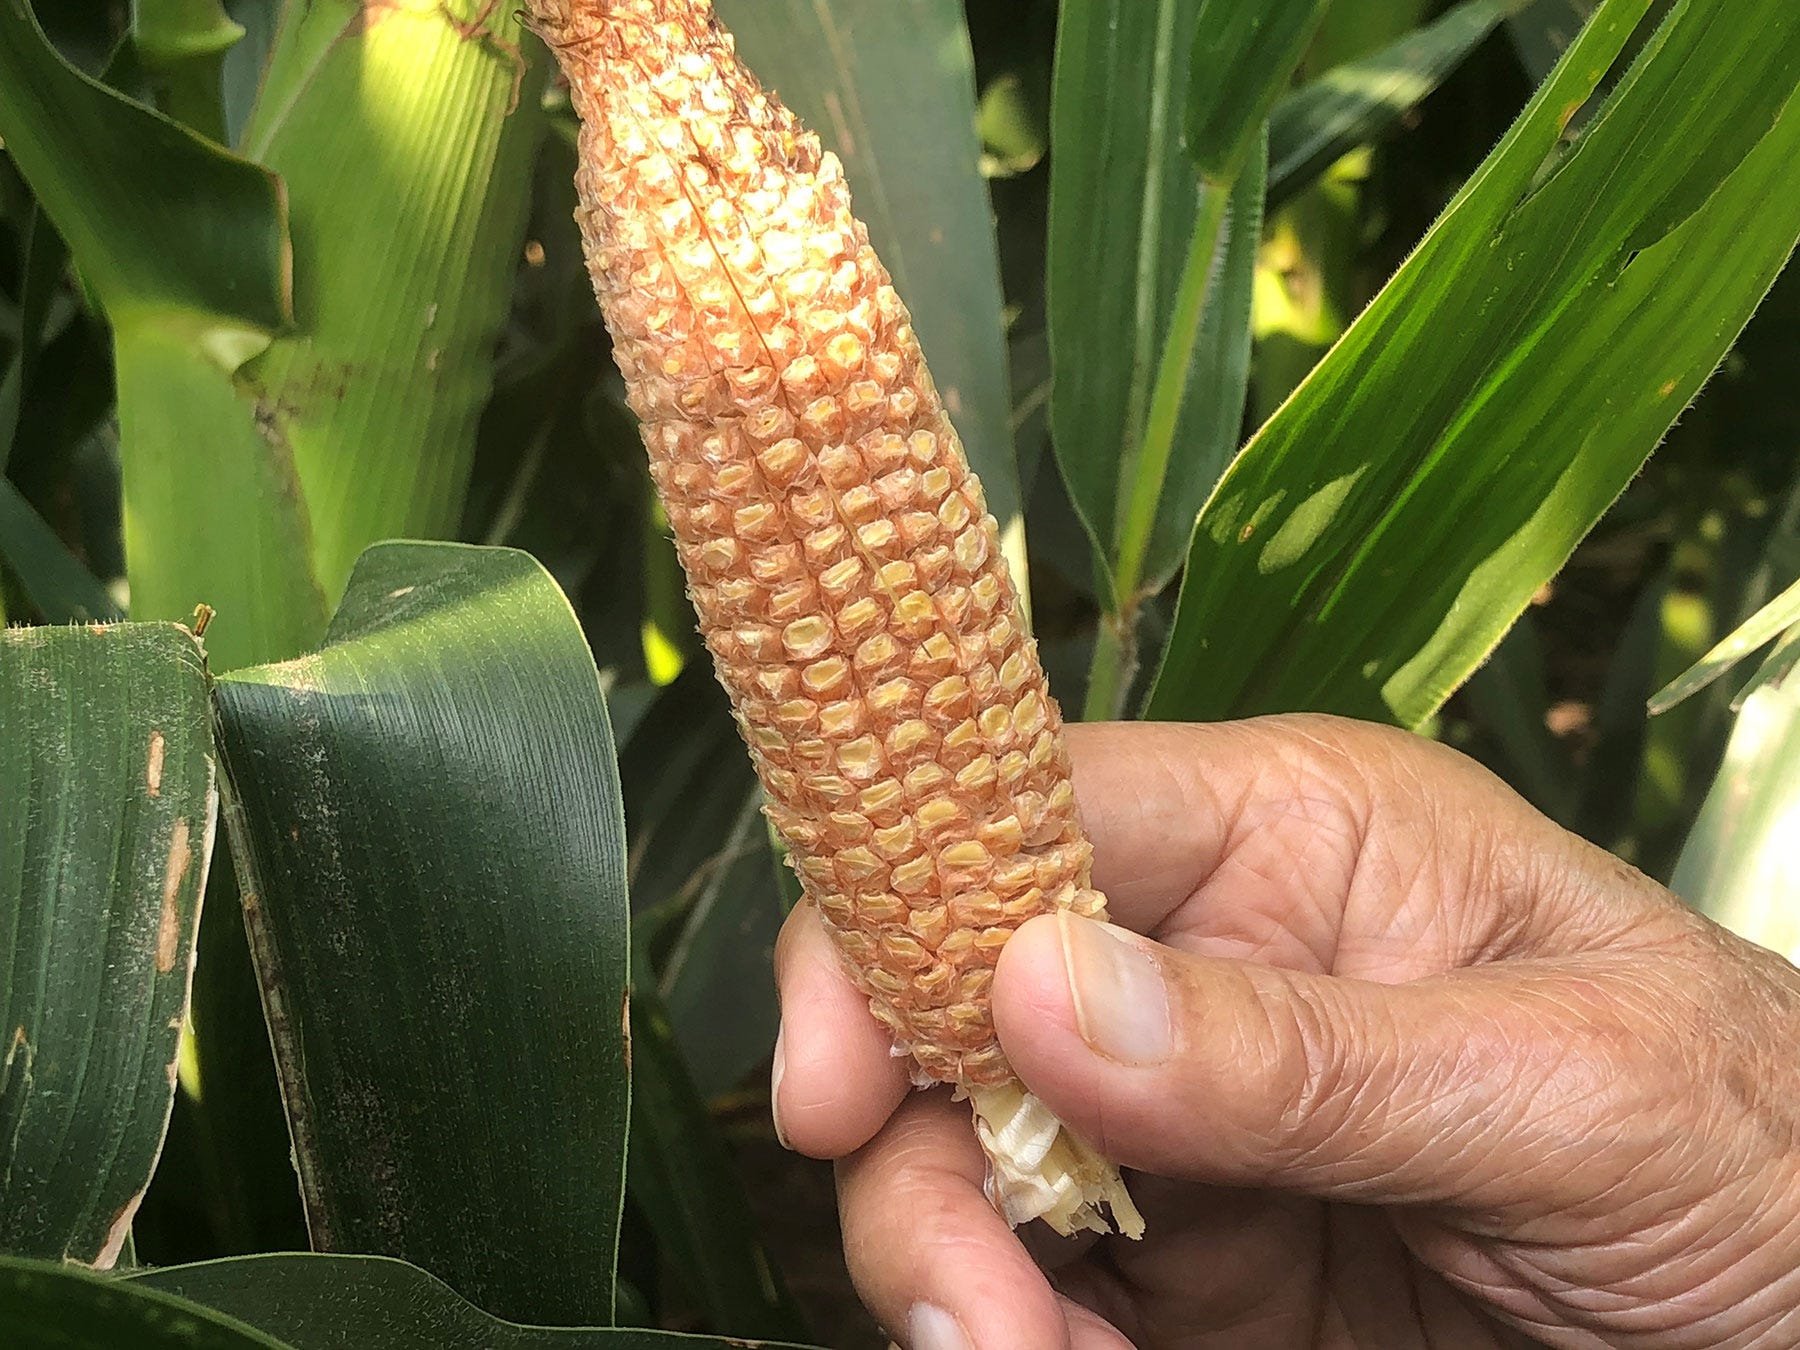 small ear of corn with aborted kernels